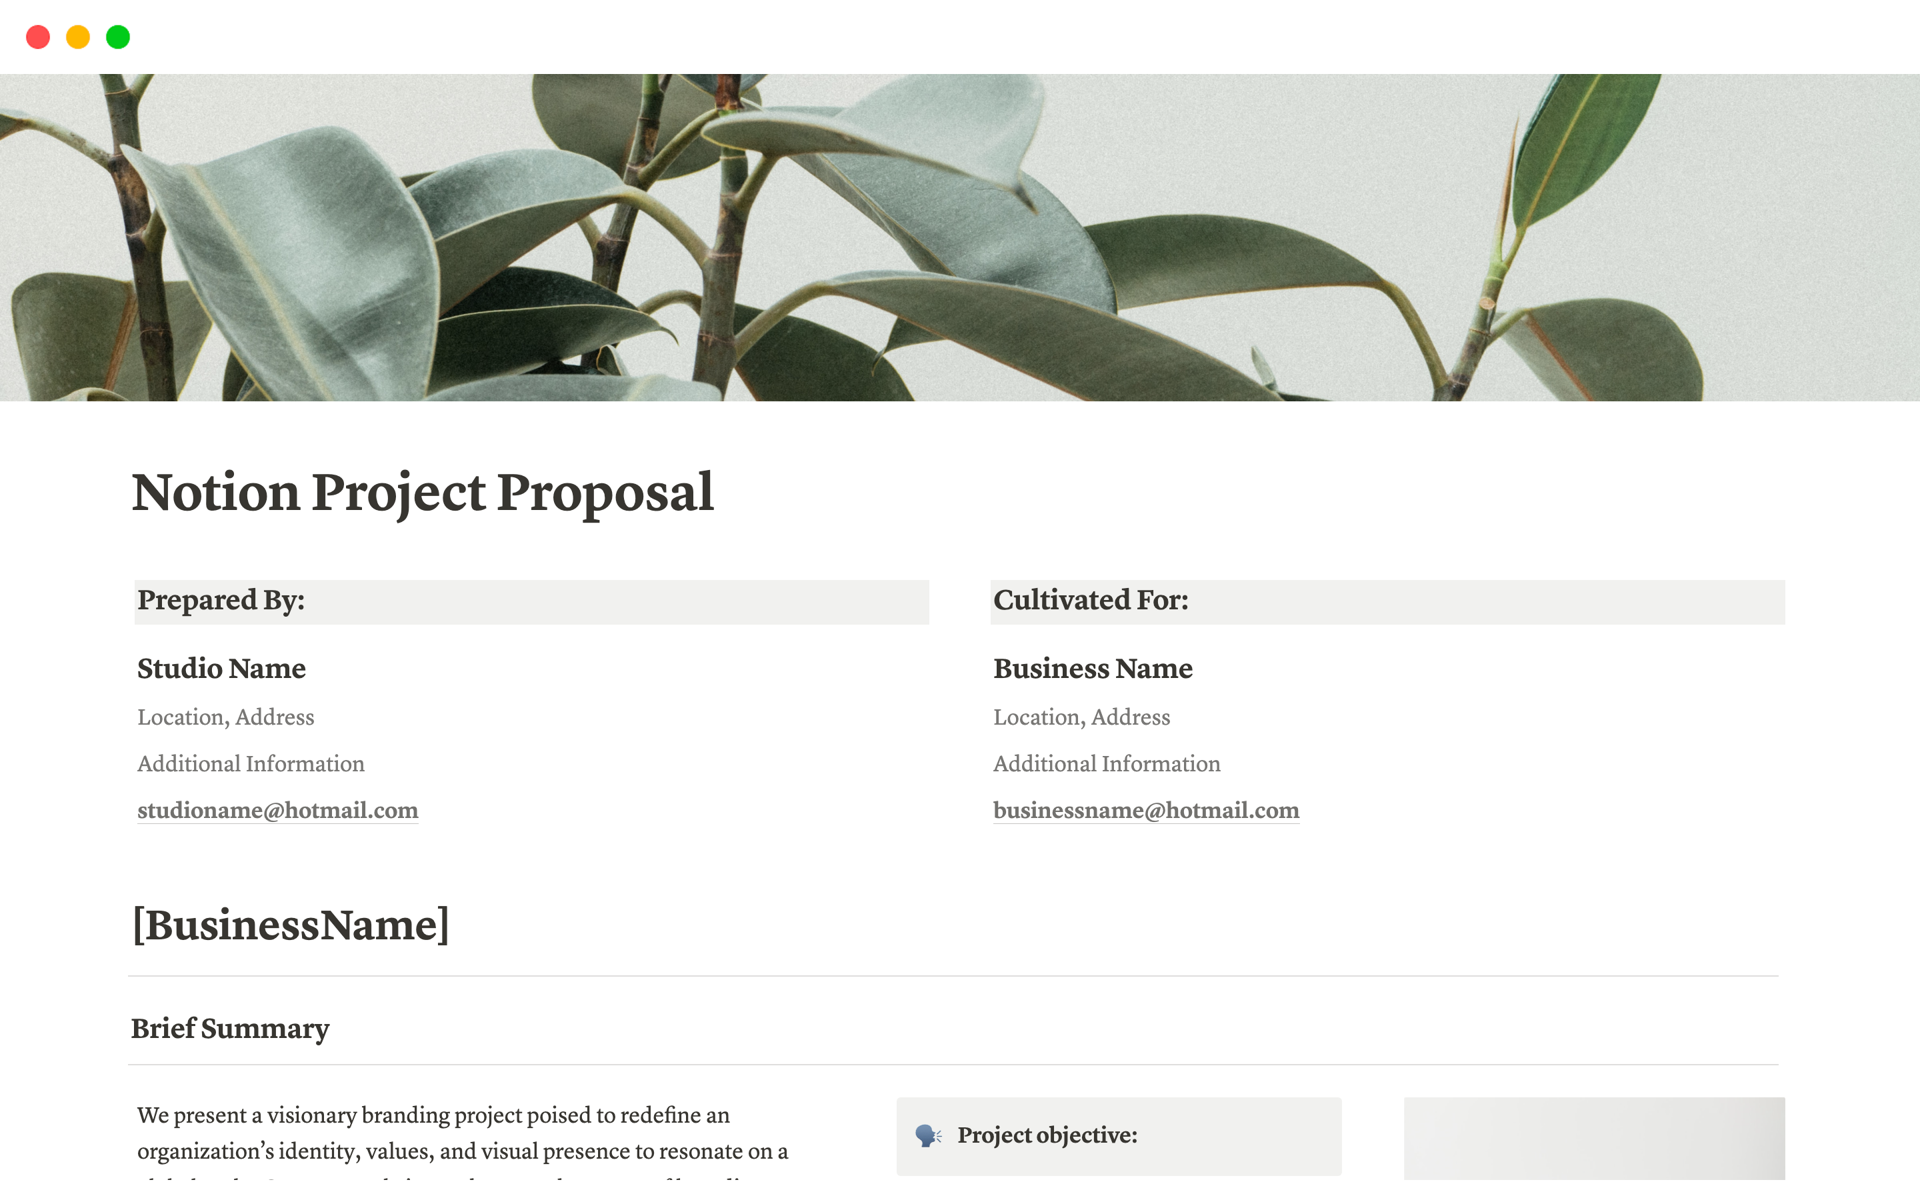 PRESENTING OUR PROJECT PROPOSAL TEMPLATE FOR NOTION!
